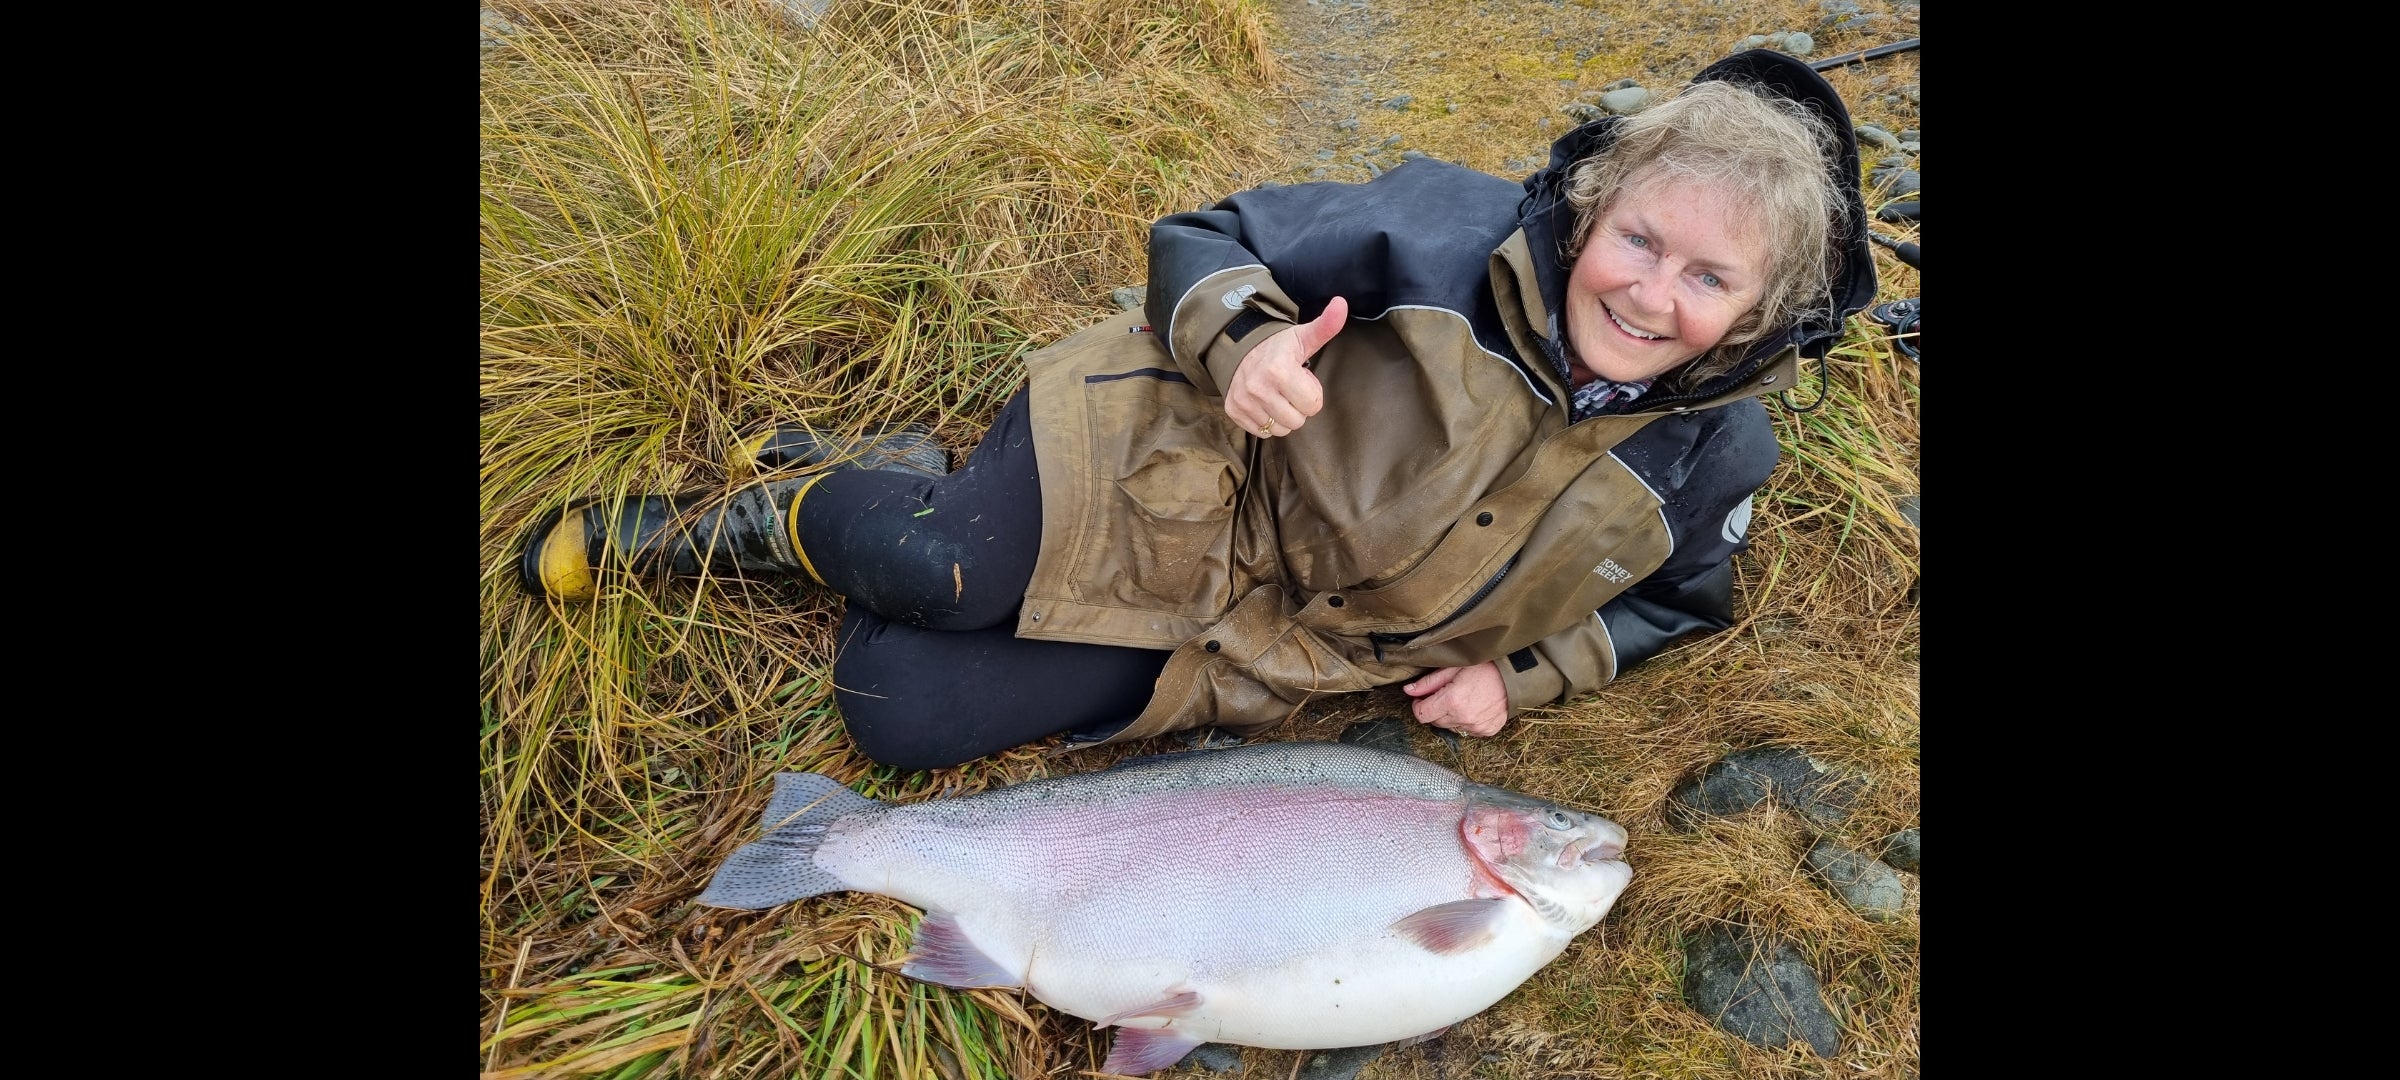 the woman lies on the ground next to the large rainbow trout